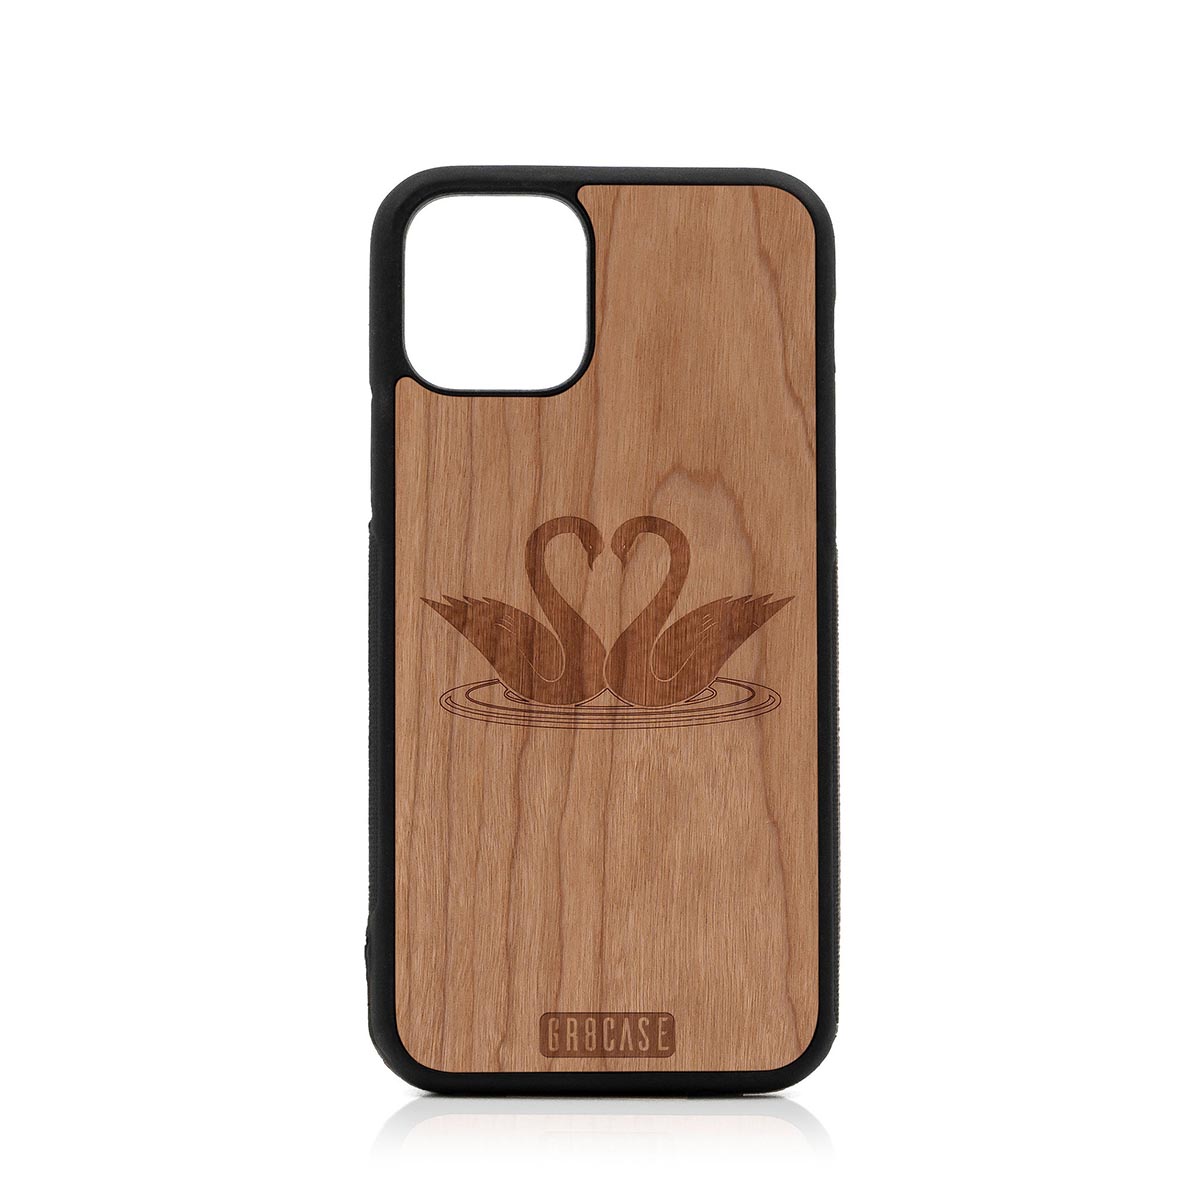 Swans Design Wood Case For iPhone 11 Pro